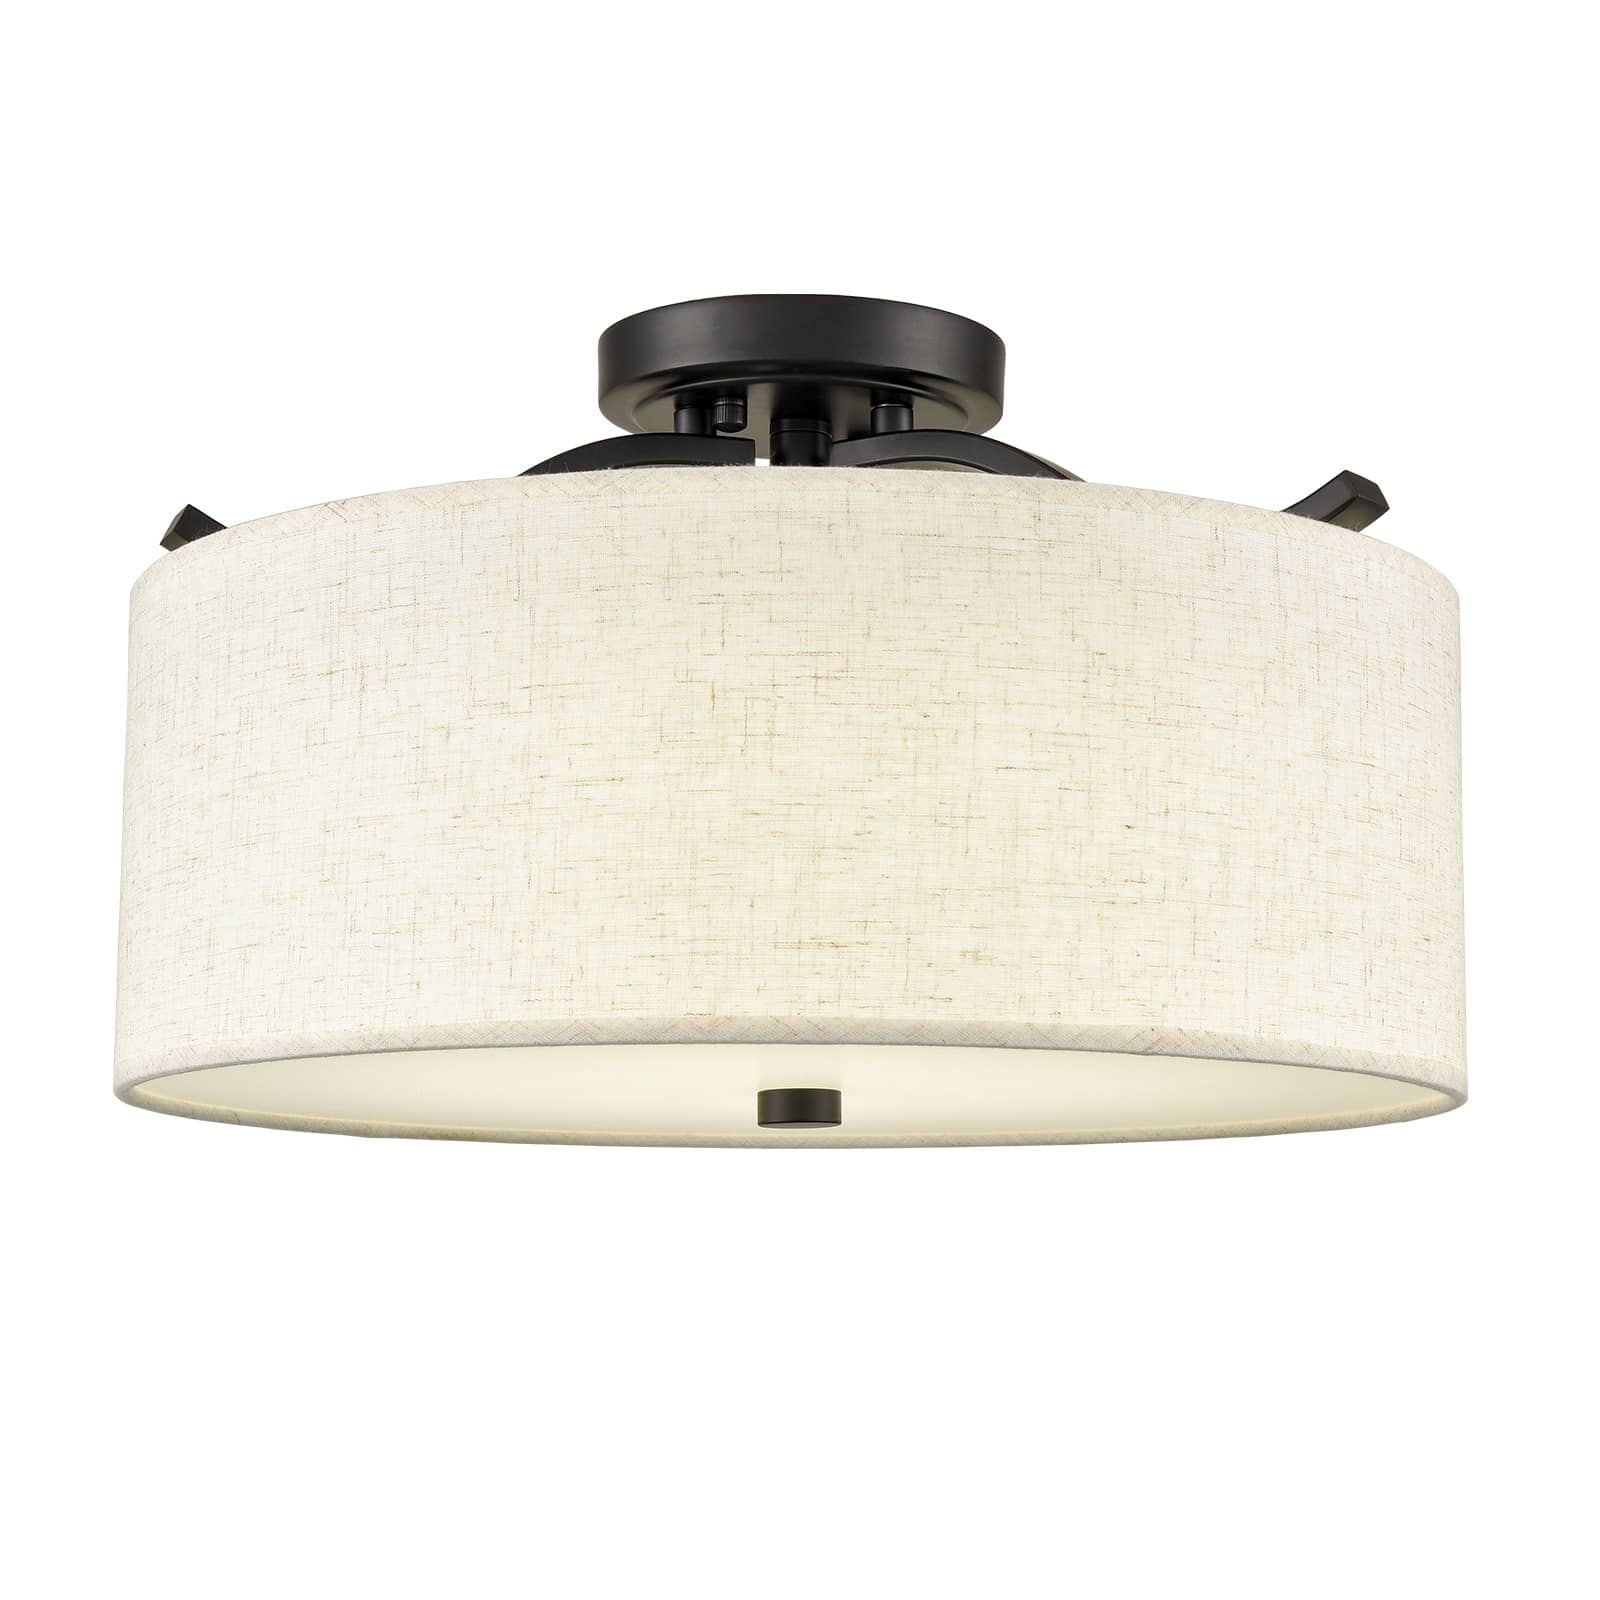 Black Semi Flush Mount Ceiling Light with Fabric Drum Shade Dimmable